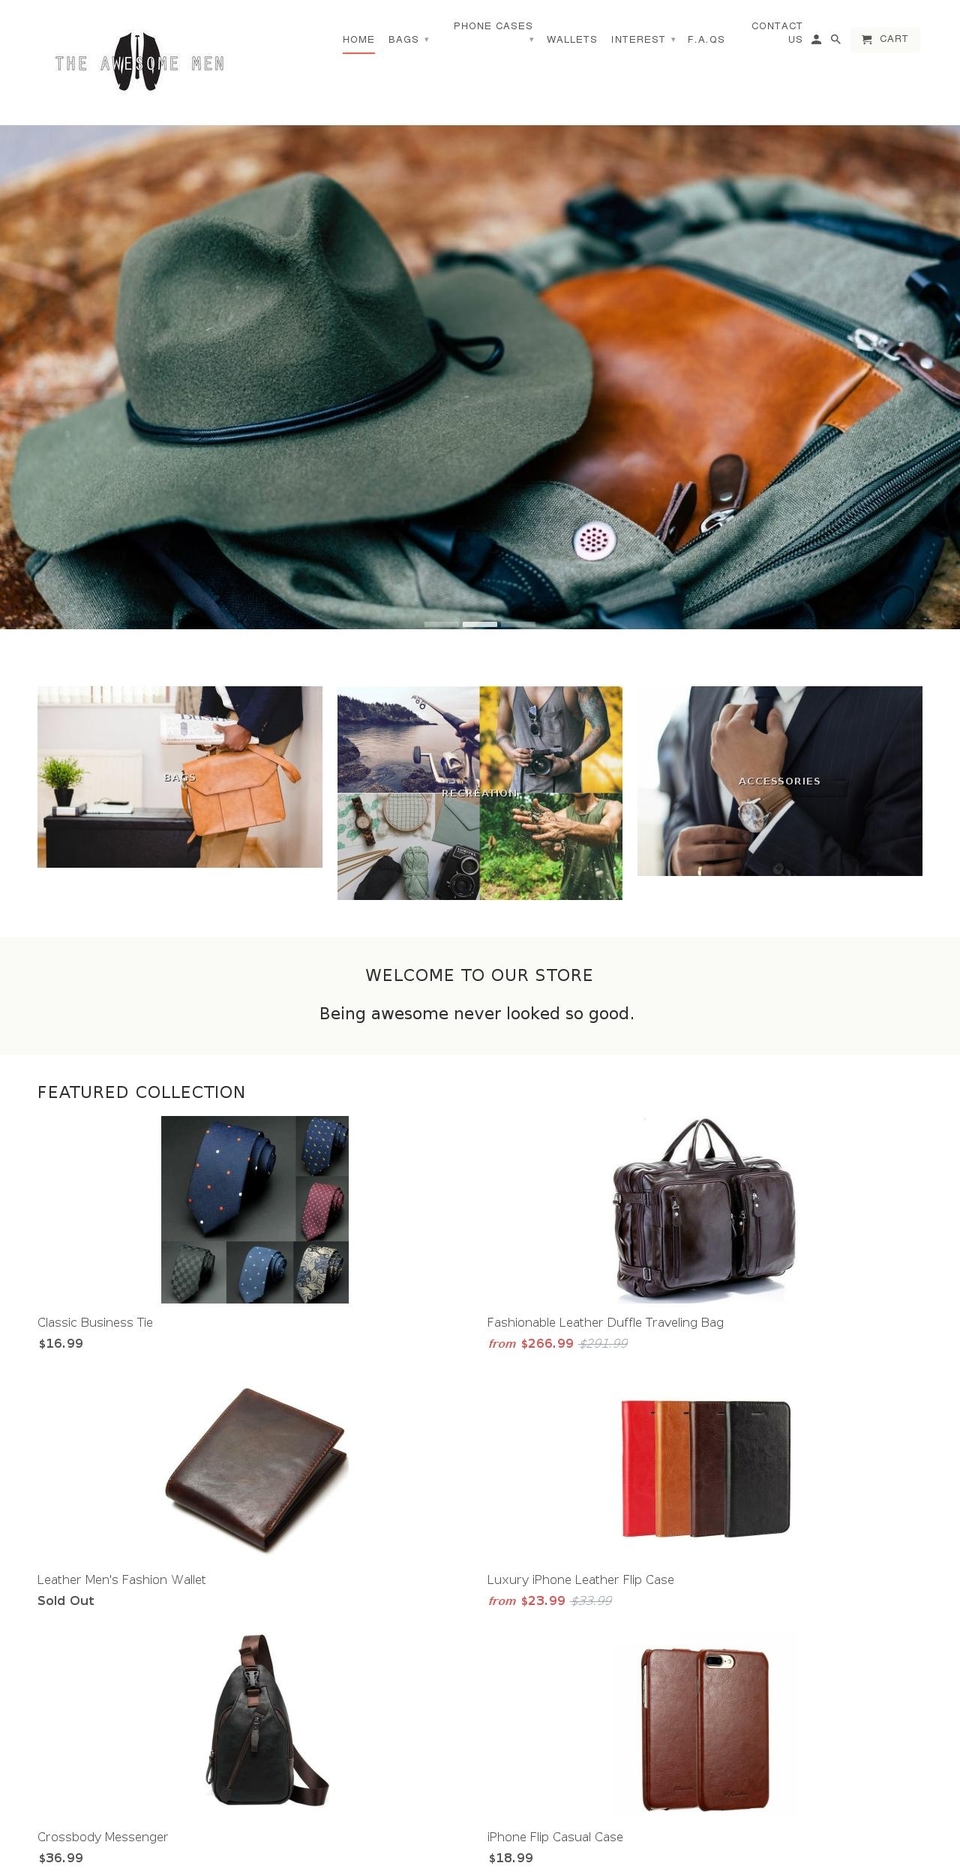 yourstore-v1-4-8 Shopify theme site example theawesomemen.com